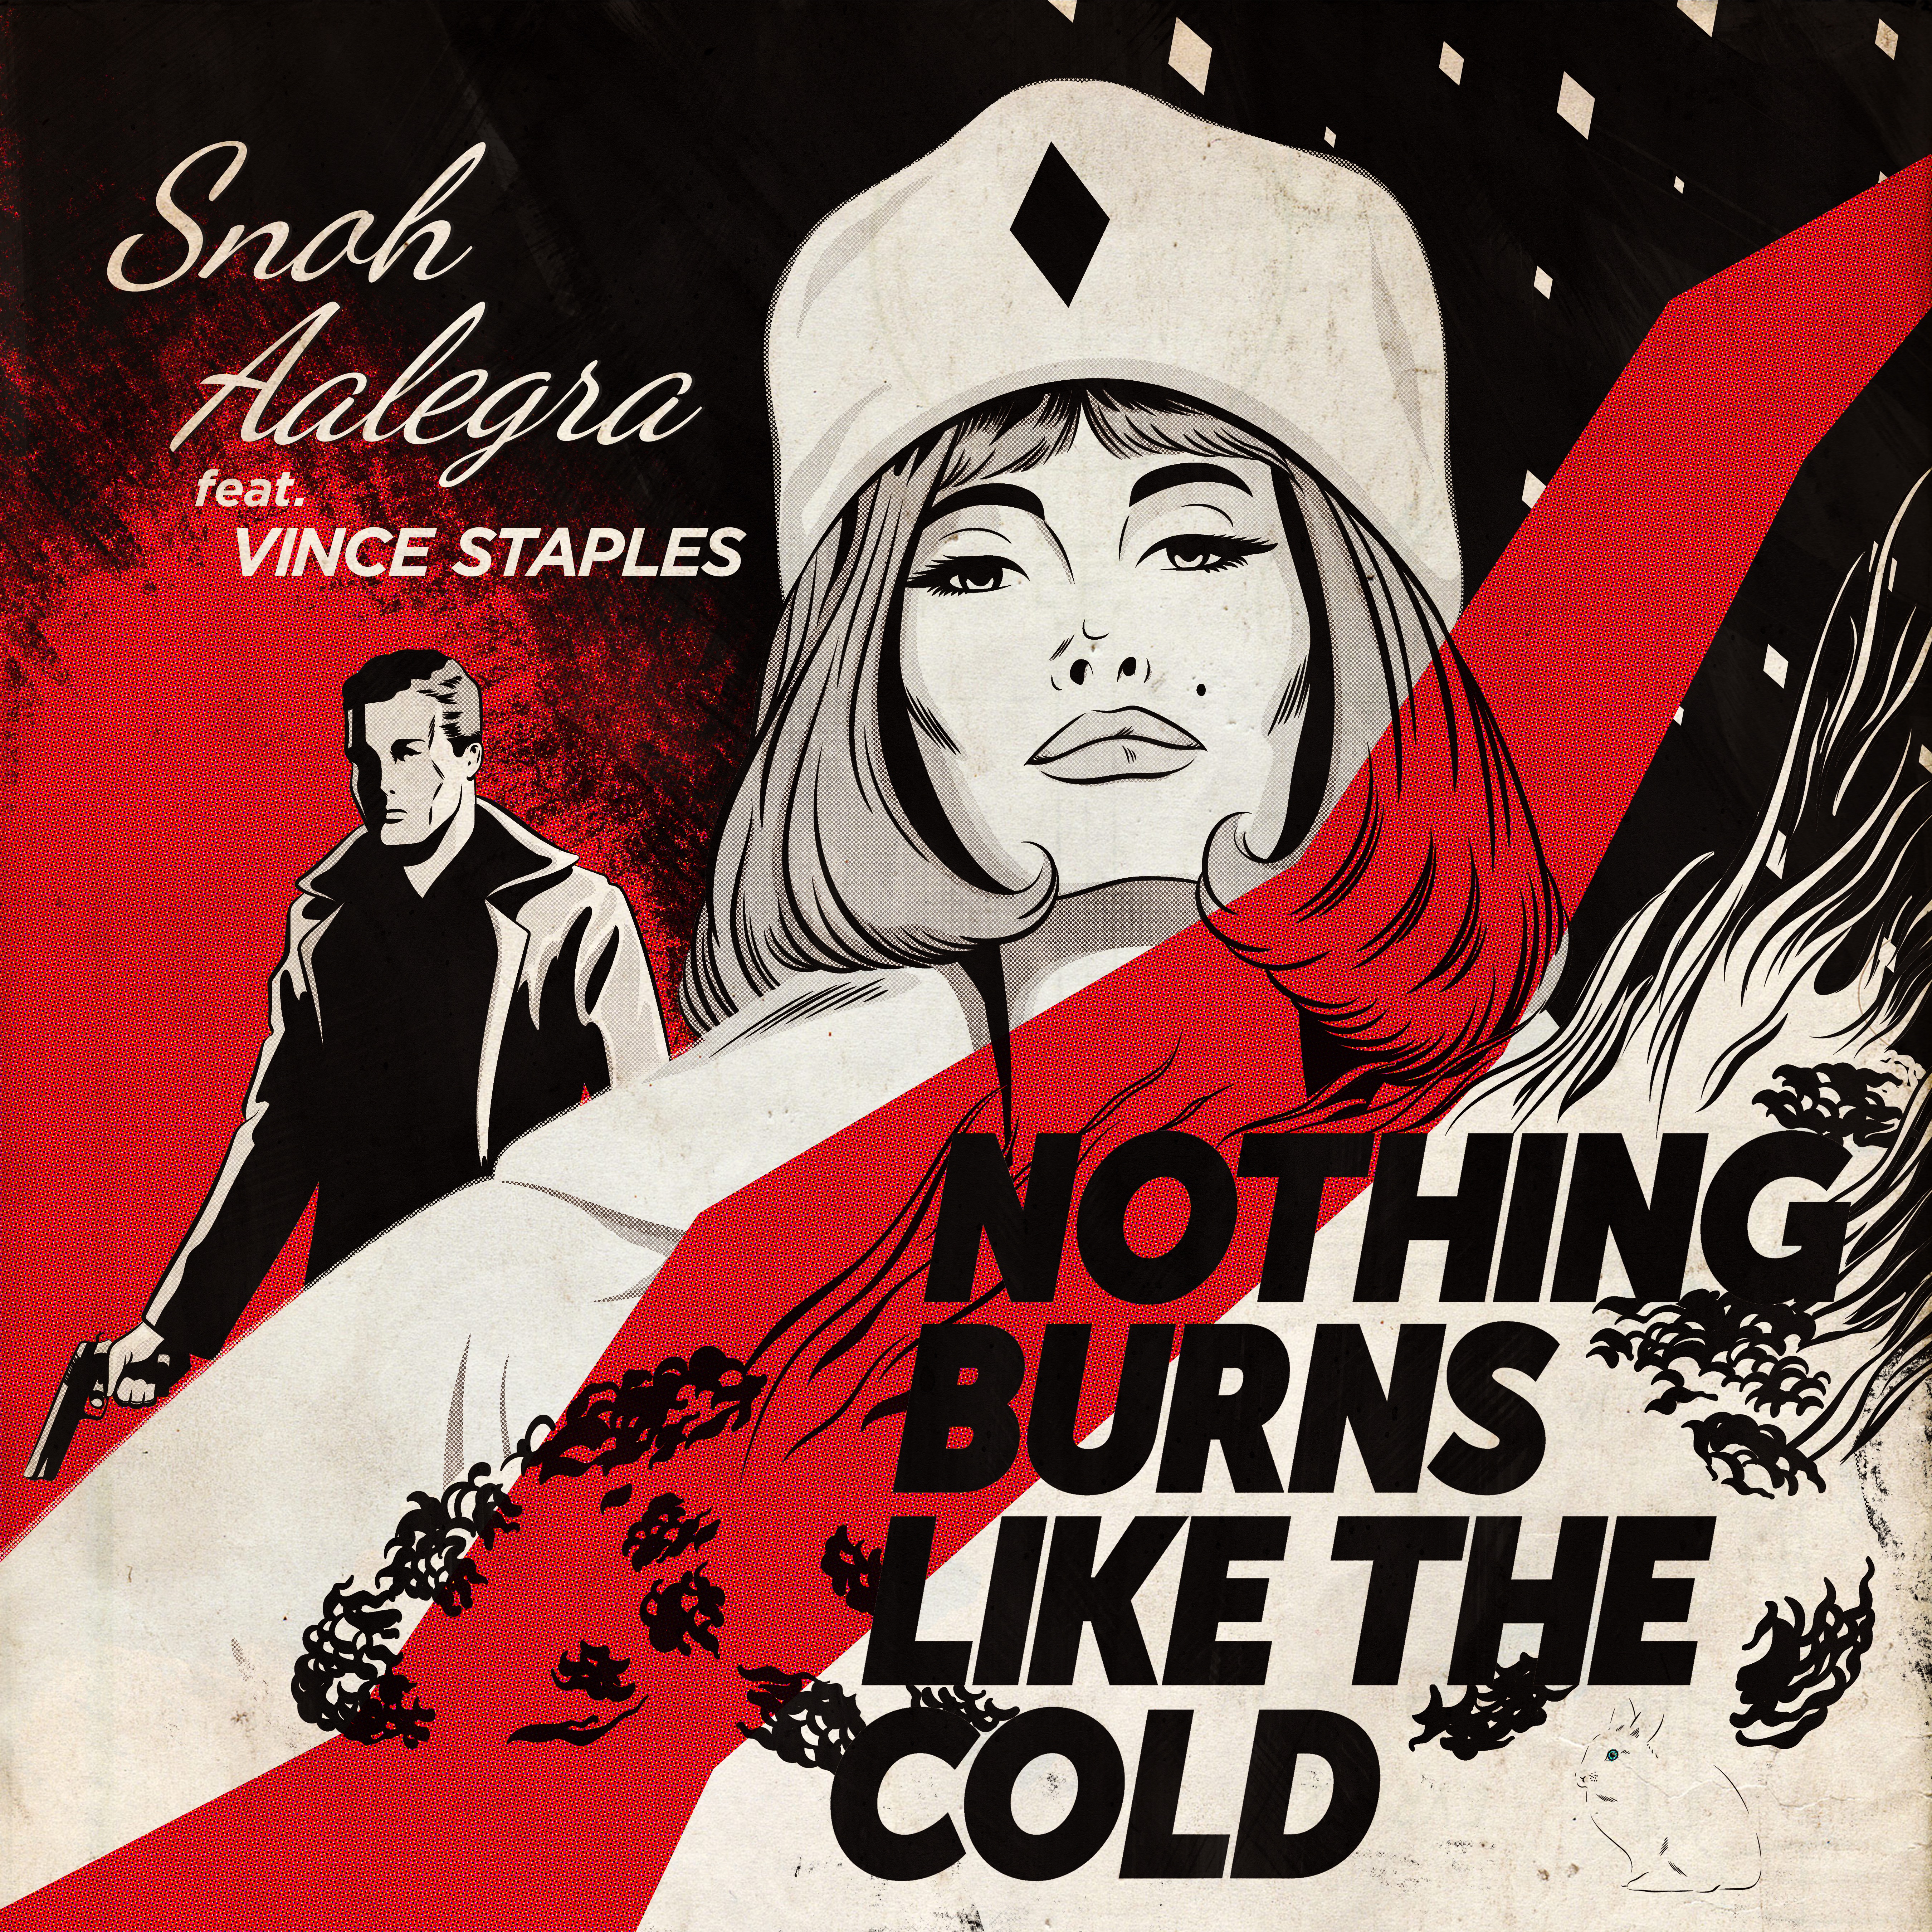 Lae alla Nothing Burns Like The Cold feat. Vince Staples